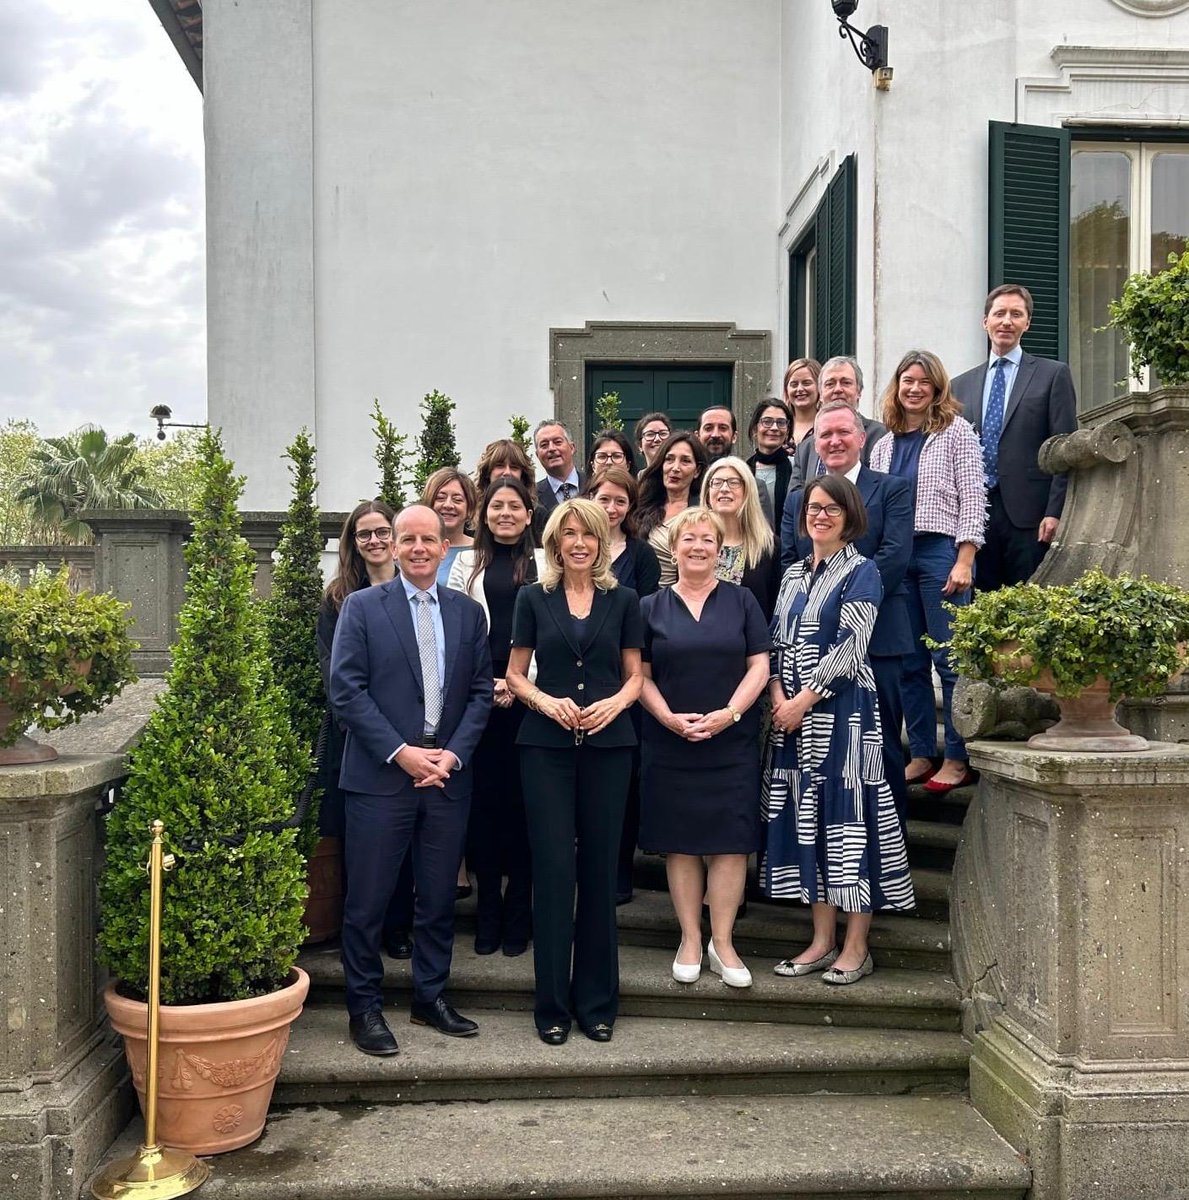 A great honour to welcome to Villa Spada @dfatirl 🇮🇪Secretary General Joe Hackett & 🇮🇪 Ambassadors to Southern European countries @IEAmbLisbon @IrlEmbMadrid @IrlEmbHolySee @IrishEmbMalta and Director Pat Kelly, for a two day meeting on Ireland's work in Southern Europe 🇪🇺🇮🇪